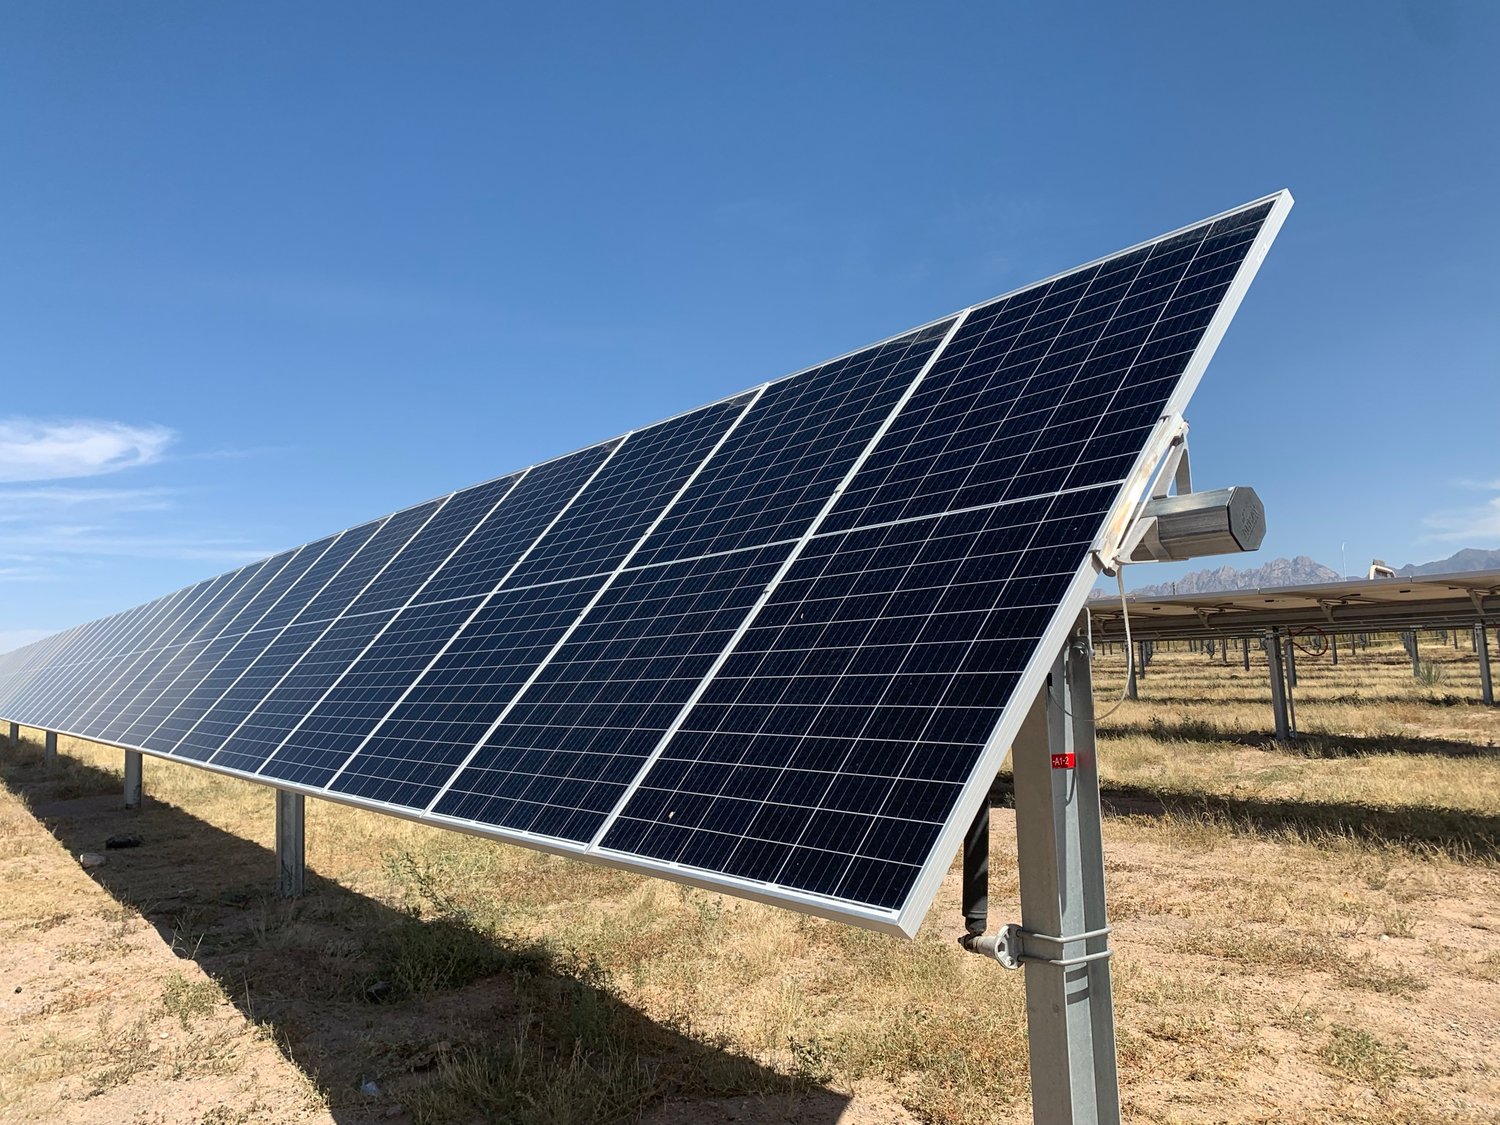 In Sept. 2021 New Mexico State University cut the ribbon on a solar array which today provides about a third of the power for the university.